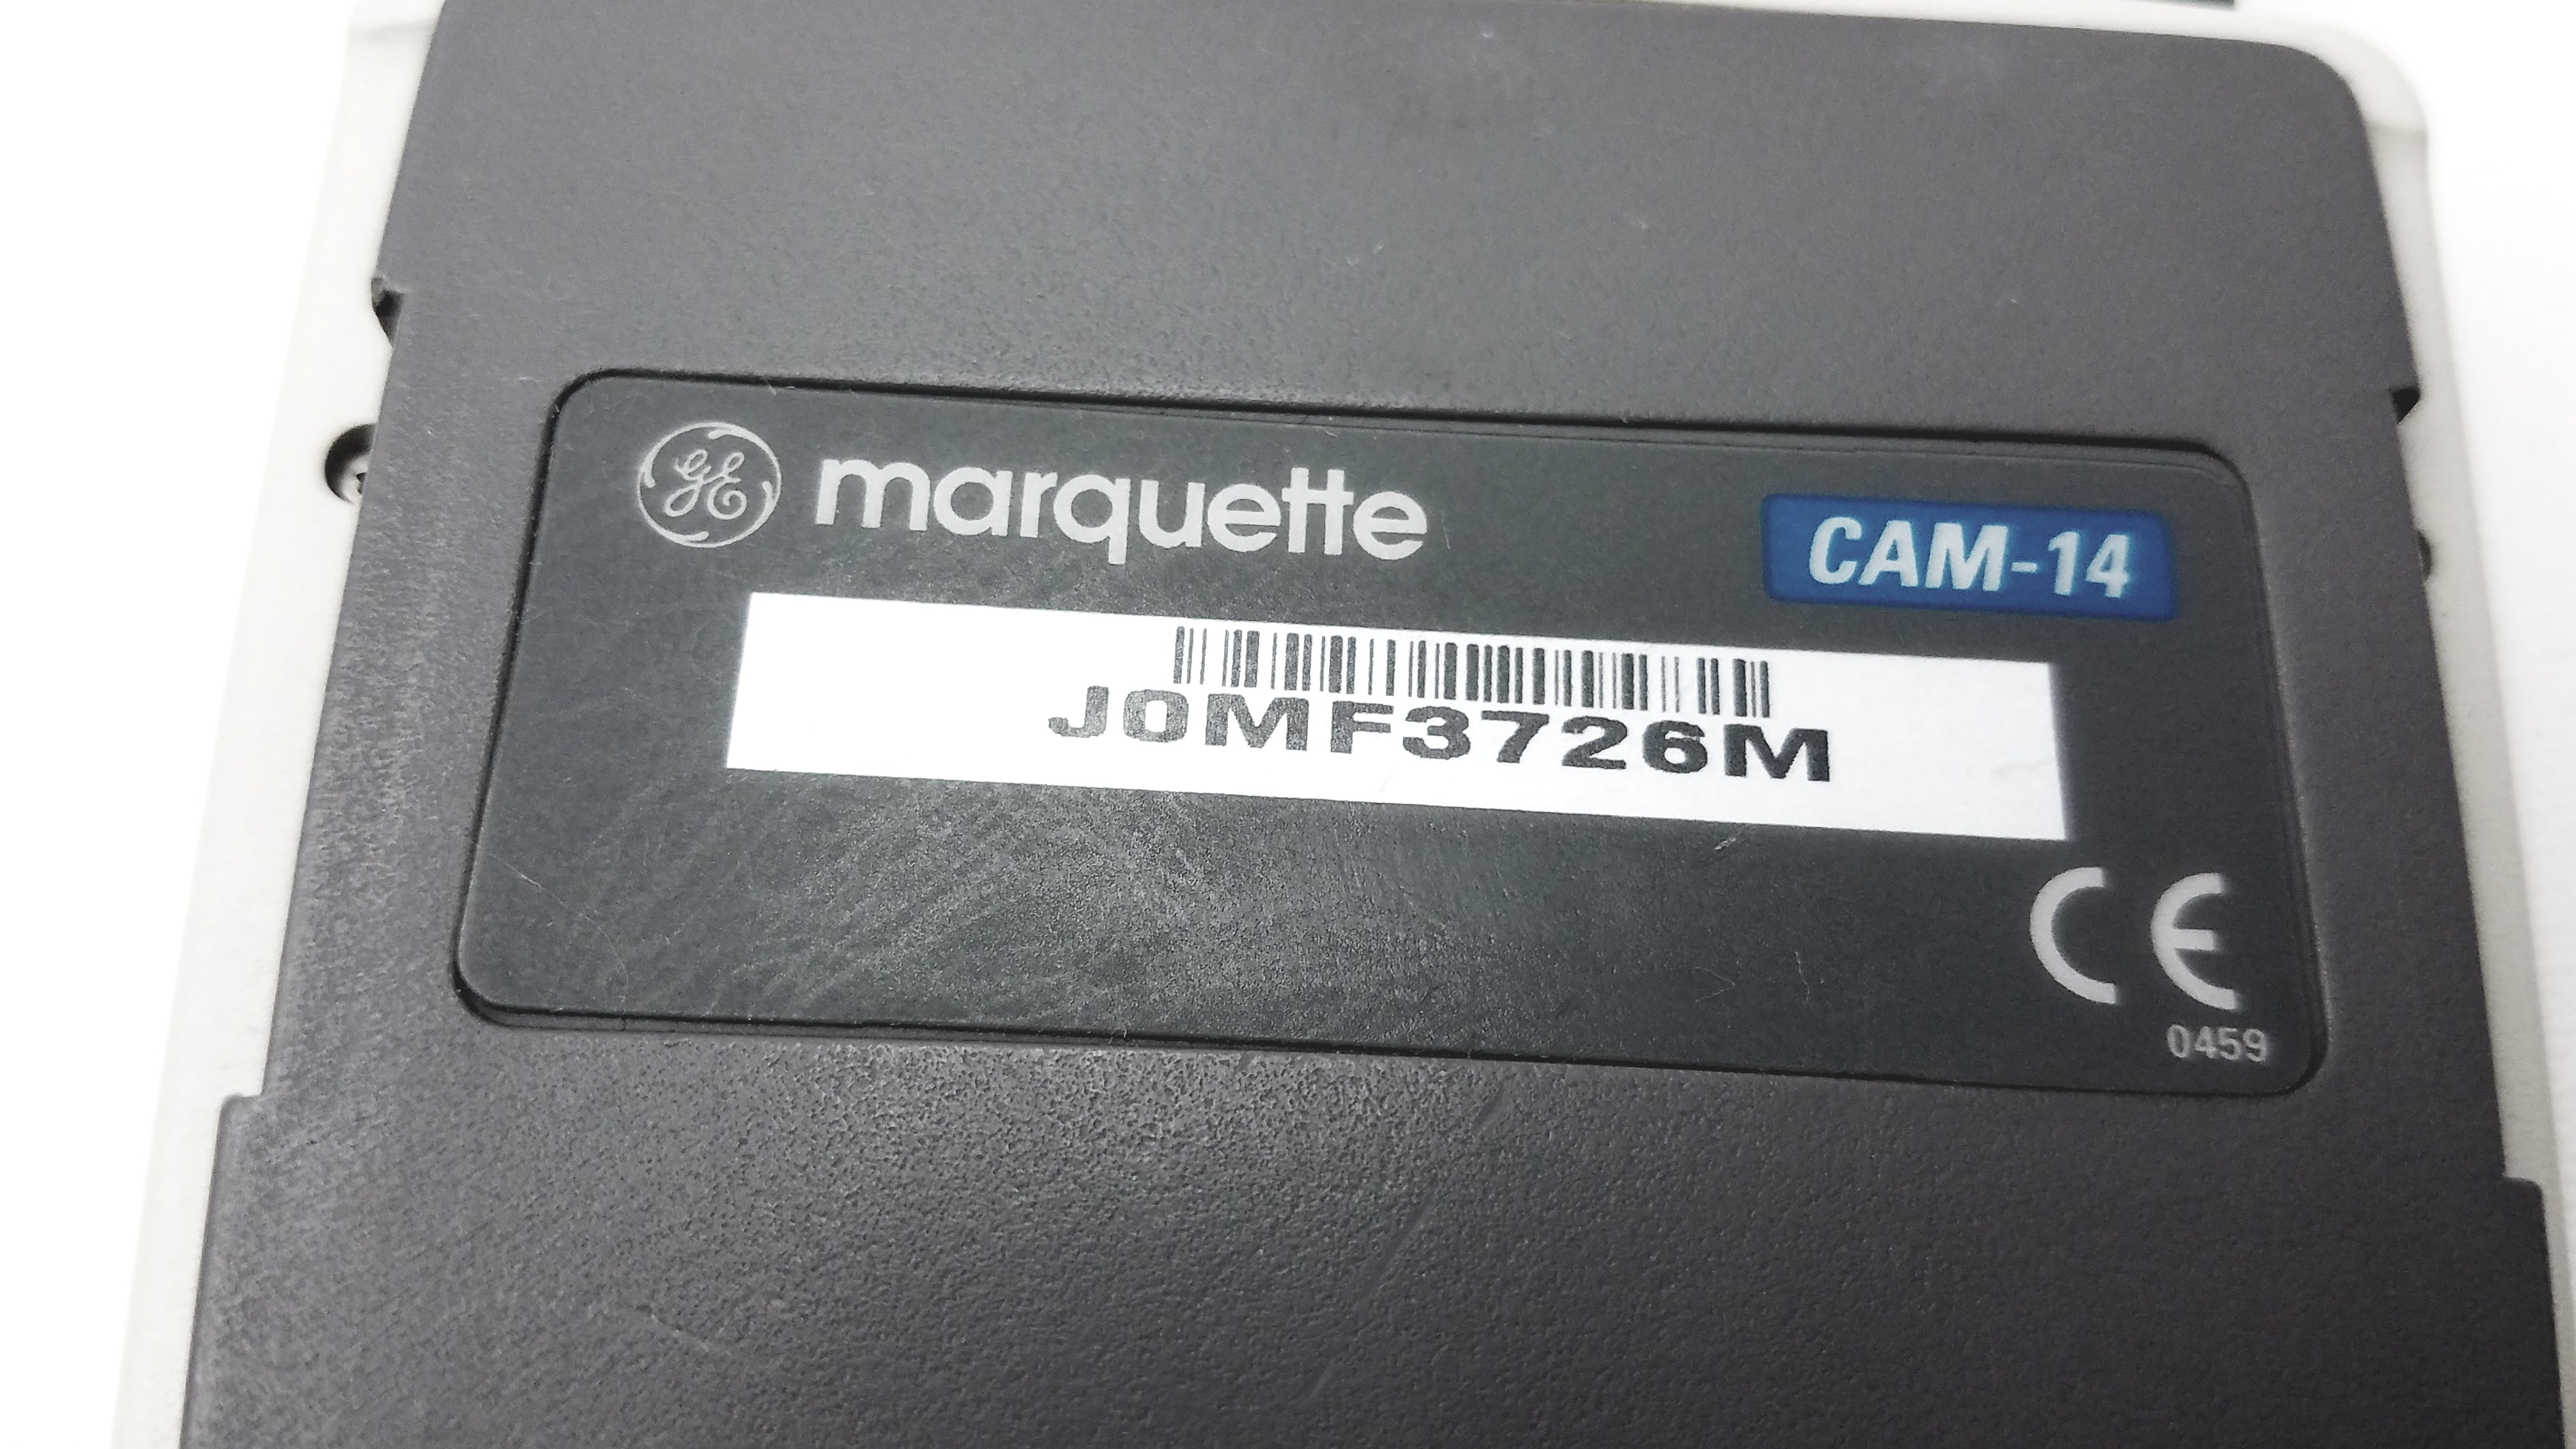 Load image into Gallery viewer, GE Marquette Cam-14 J0Mf3726M Acquisition Module